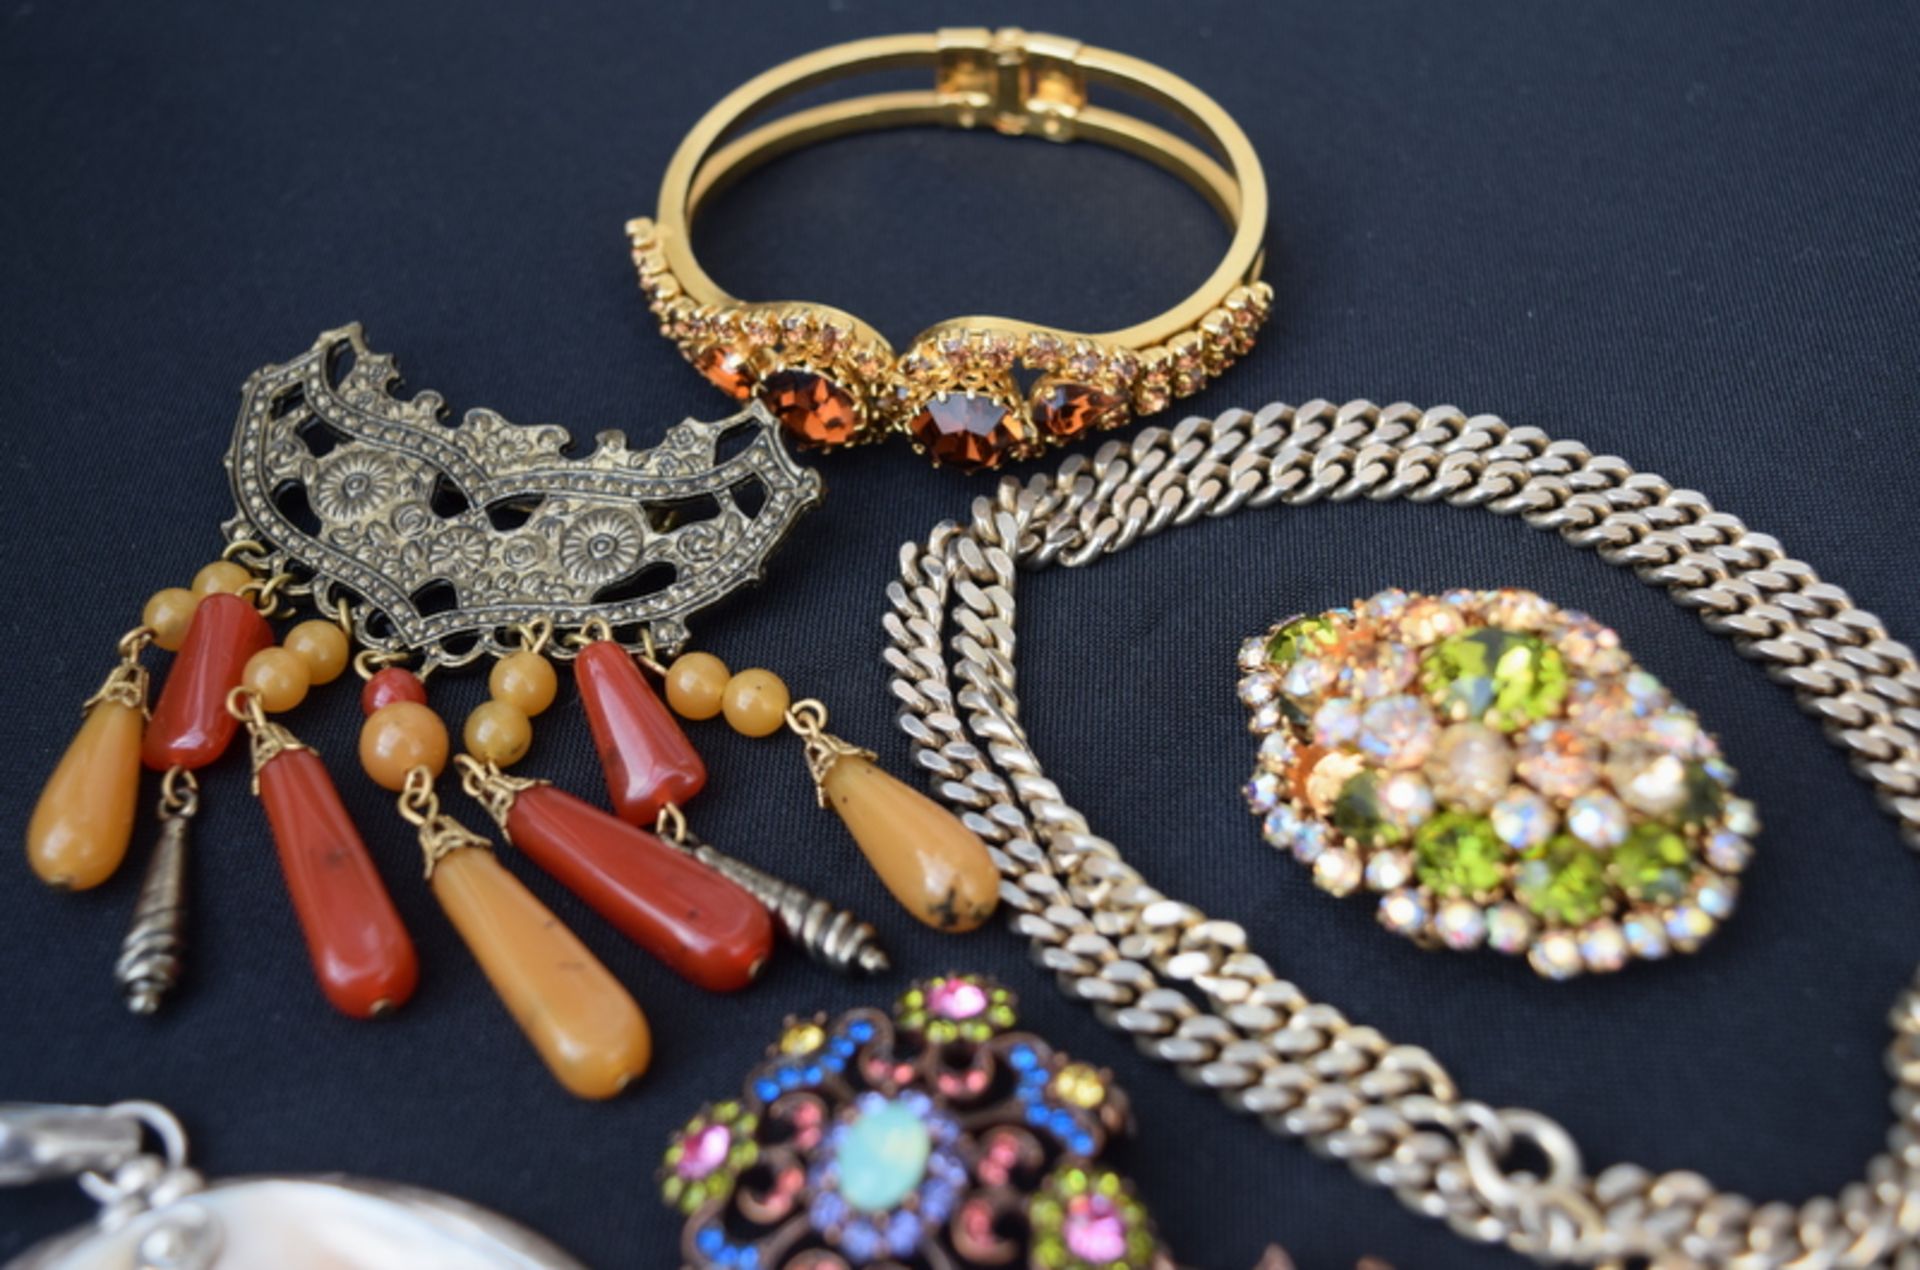 7 Pieces Of Costume Jewellery - No Reserve. - Image 2 of 3